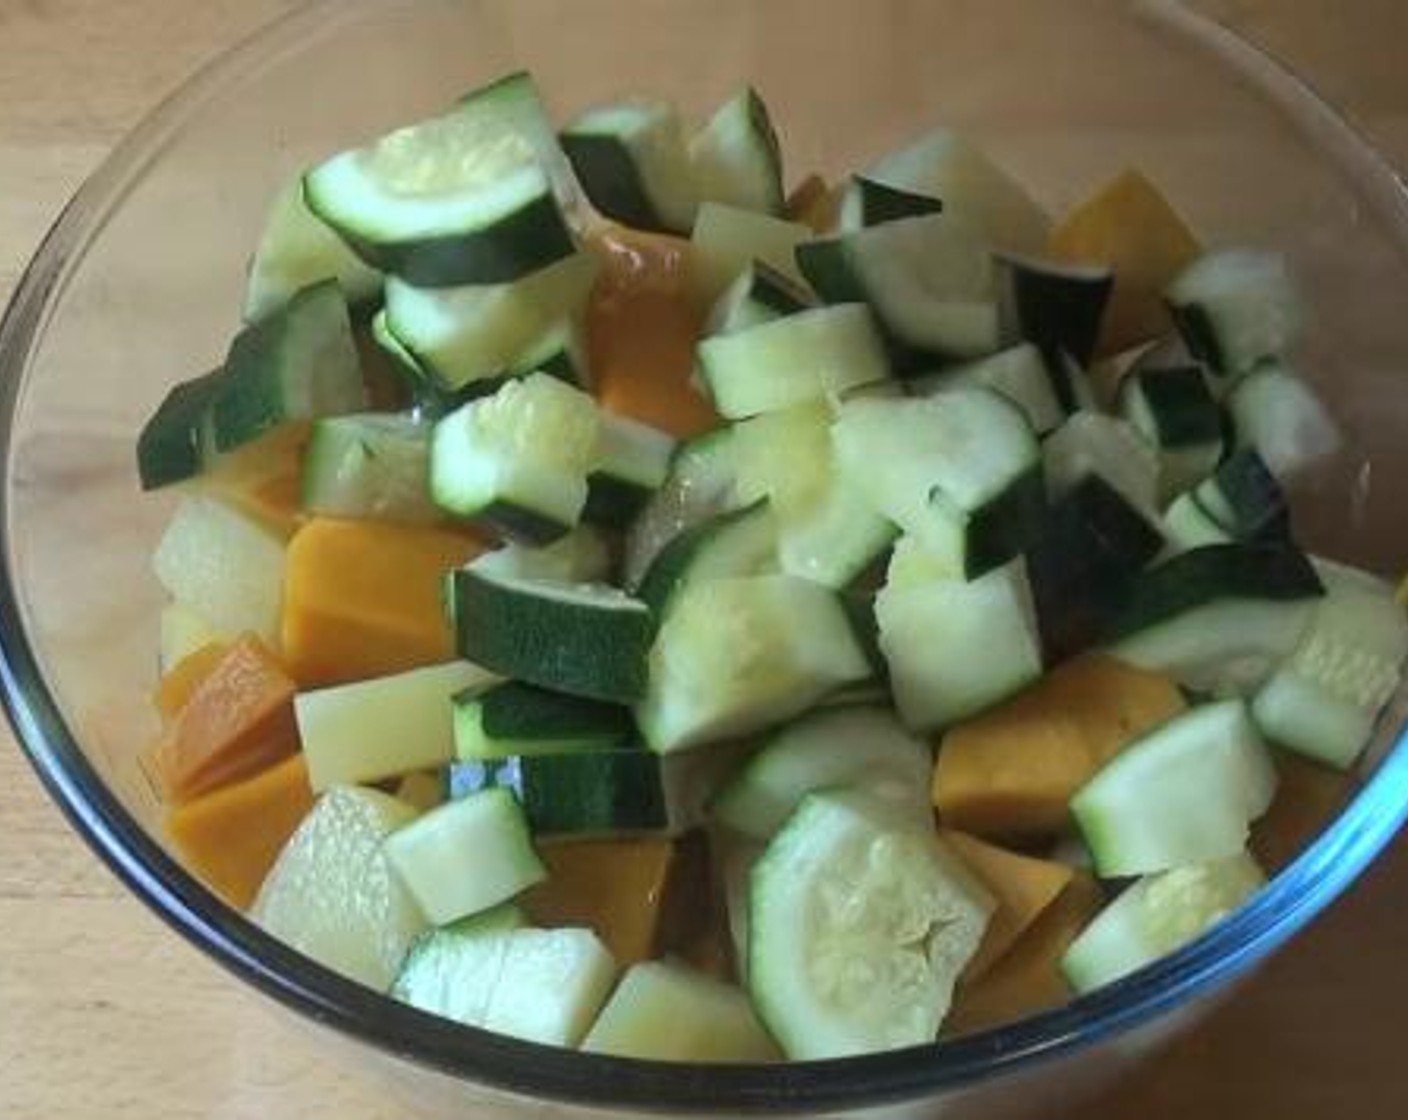 step 1 Into a bowl, add in your cooked  Pumpkins (3 1/2 cups), cooked Potatoes (14 oz), and Zucchini (1). Toss everything to combine.